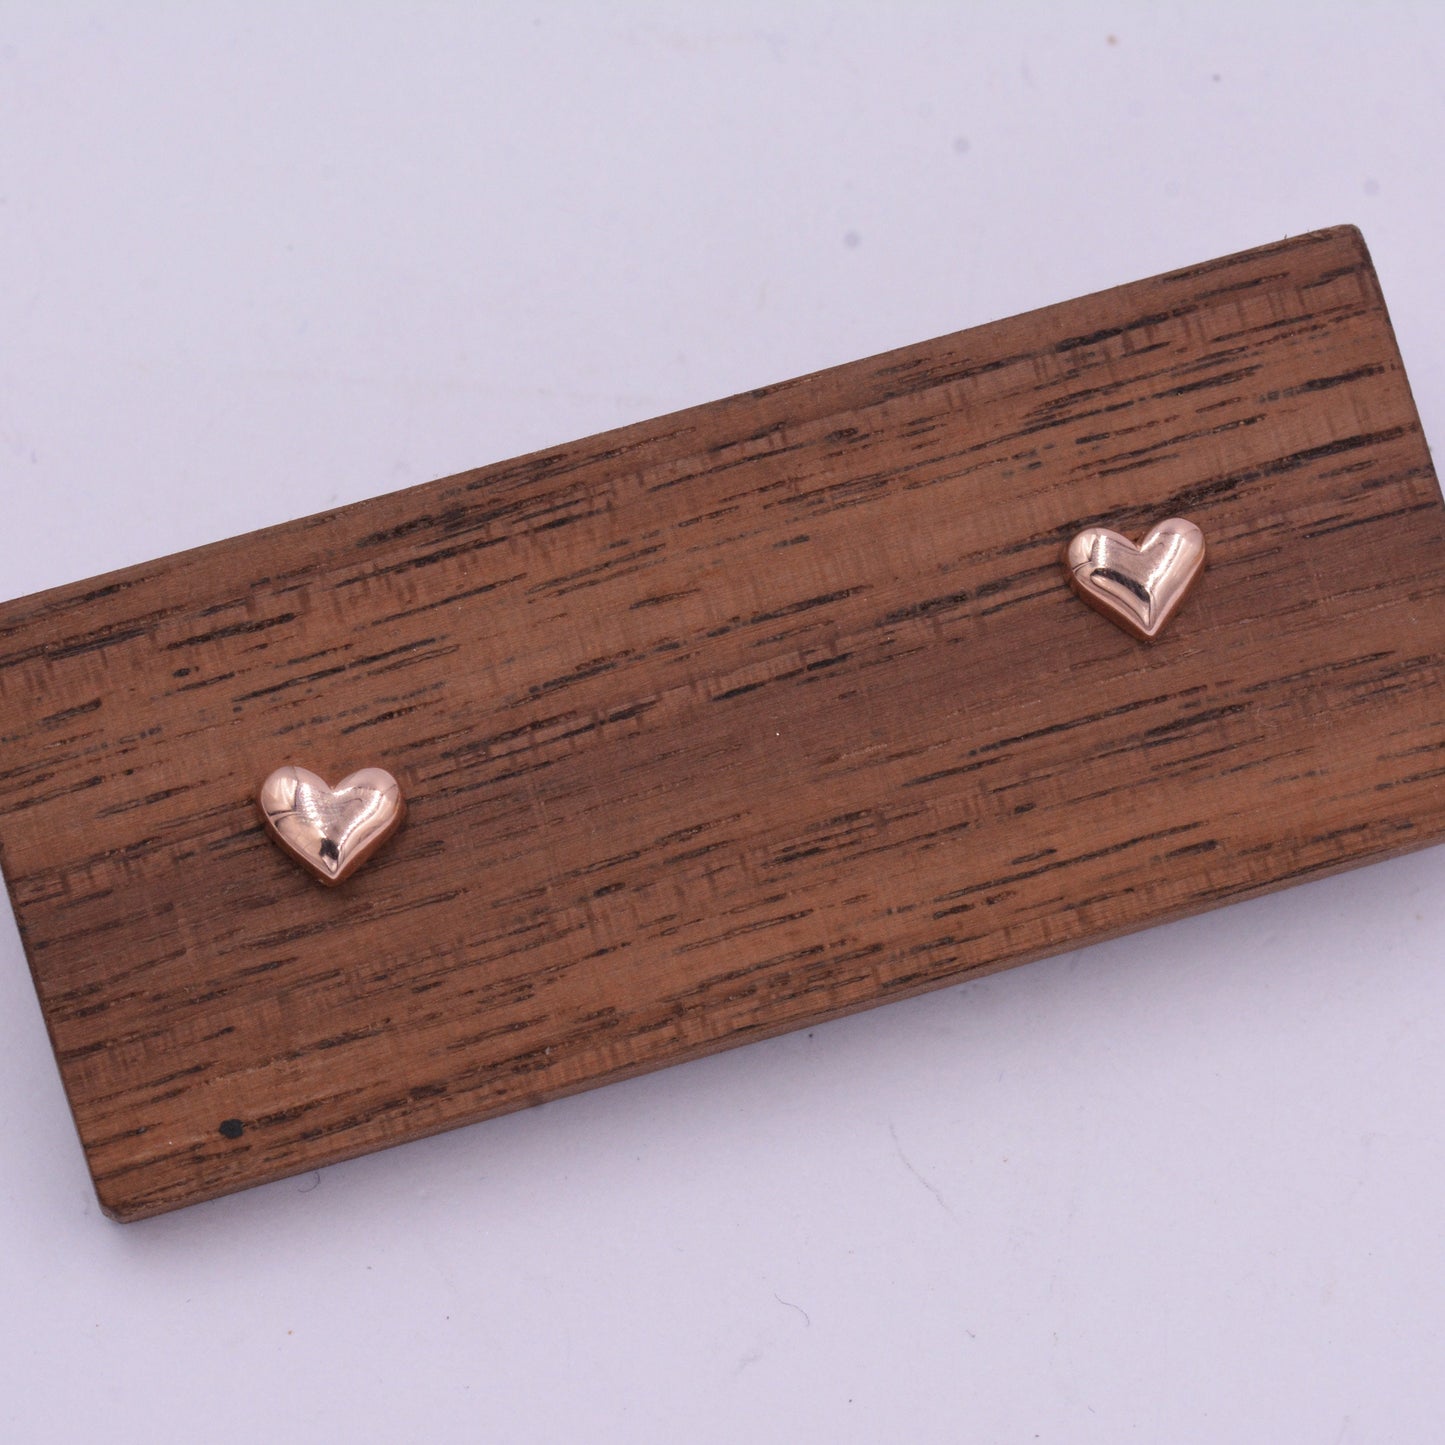 Small Pair of Heart Stud Earrings in Sterling Silver, Simple Stud, Silver and Rose Gold, Minimalist and Stylish